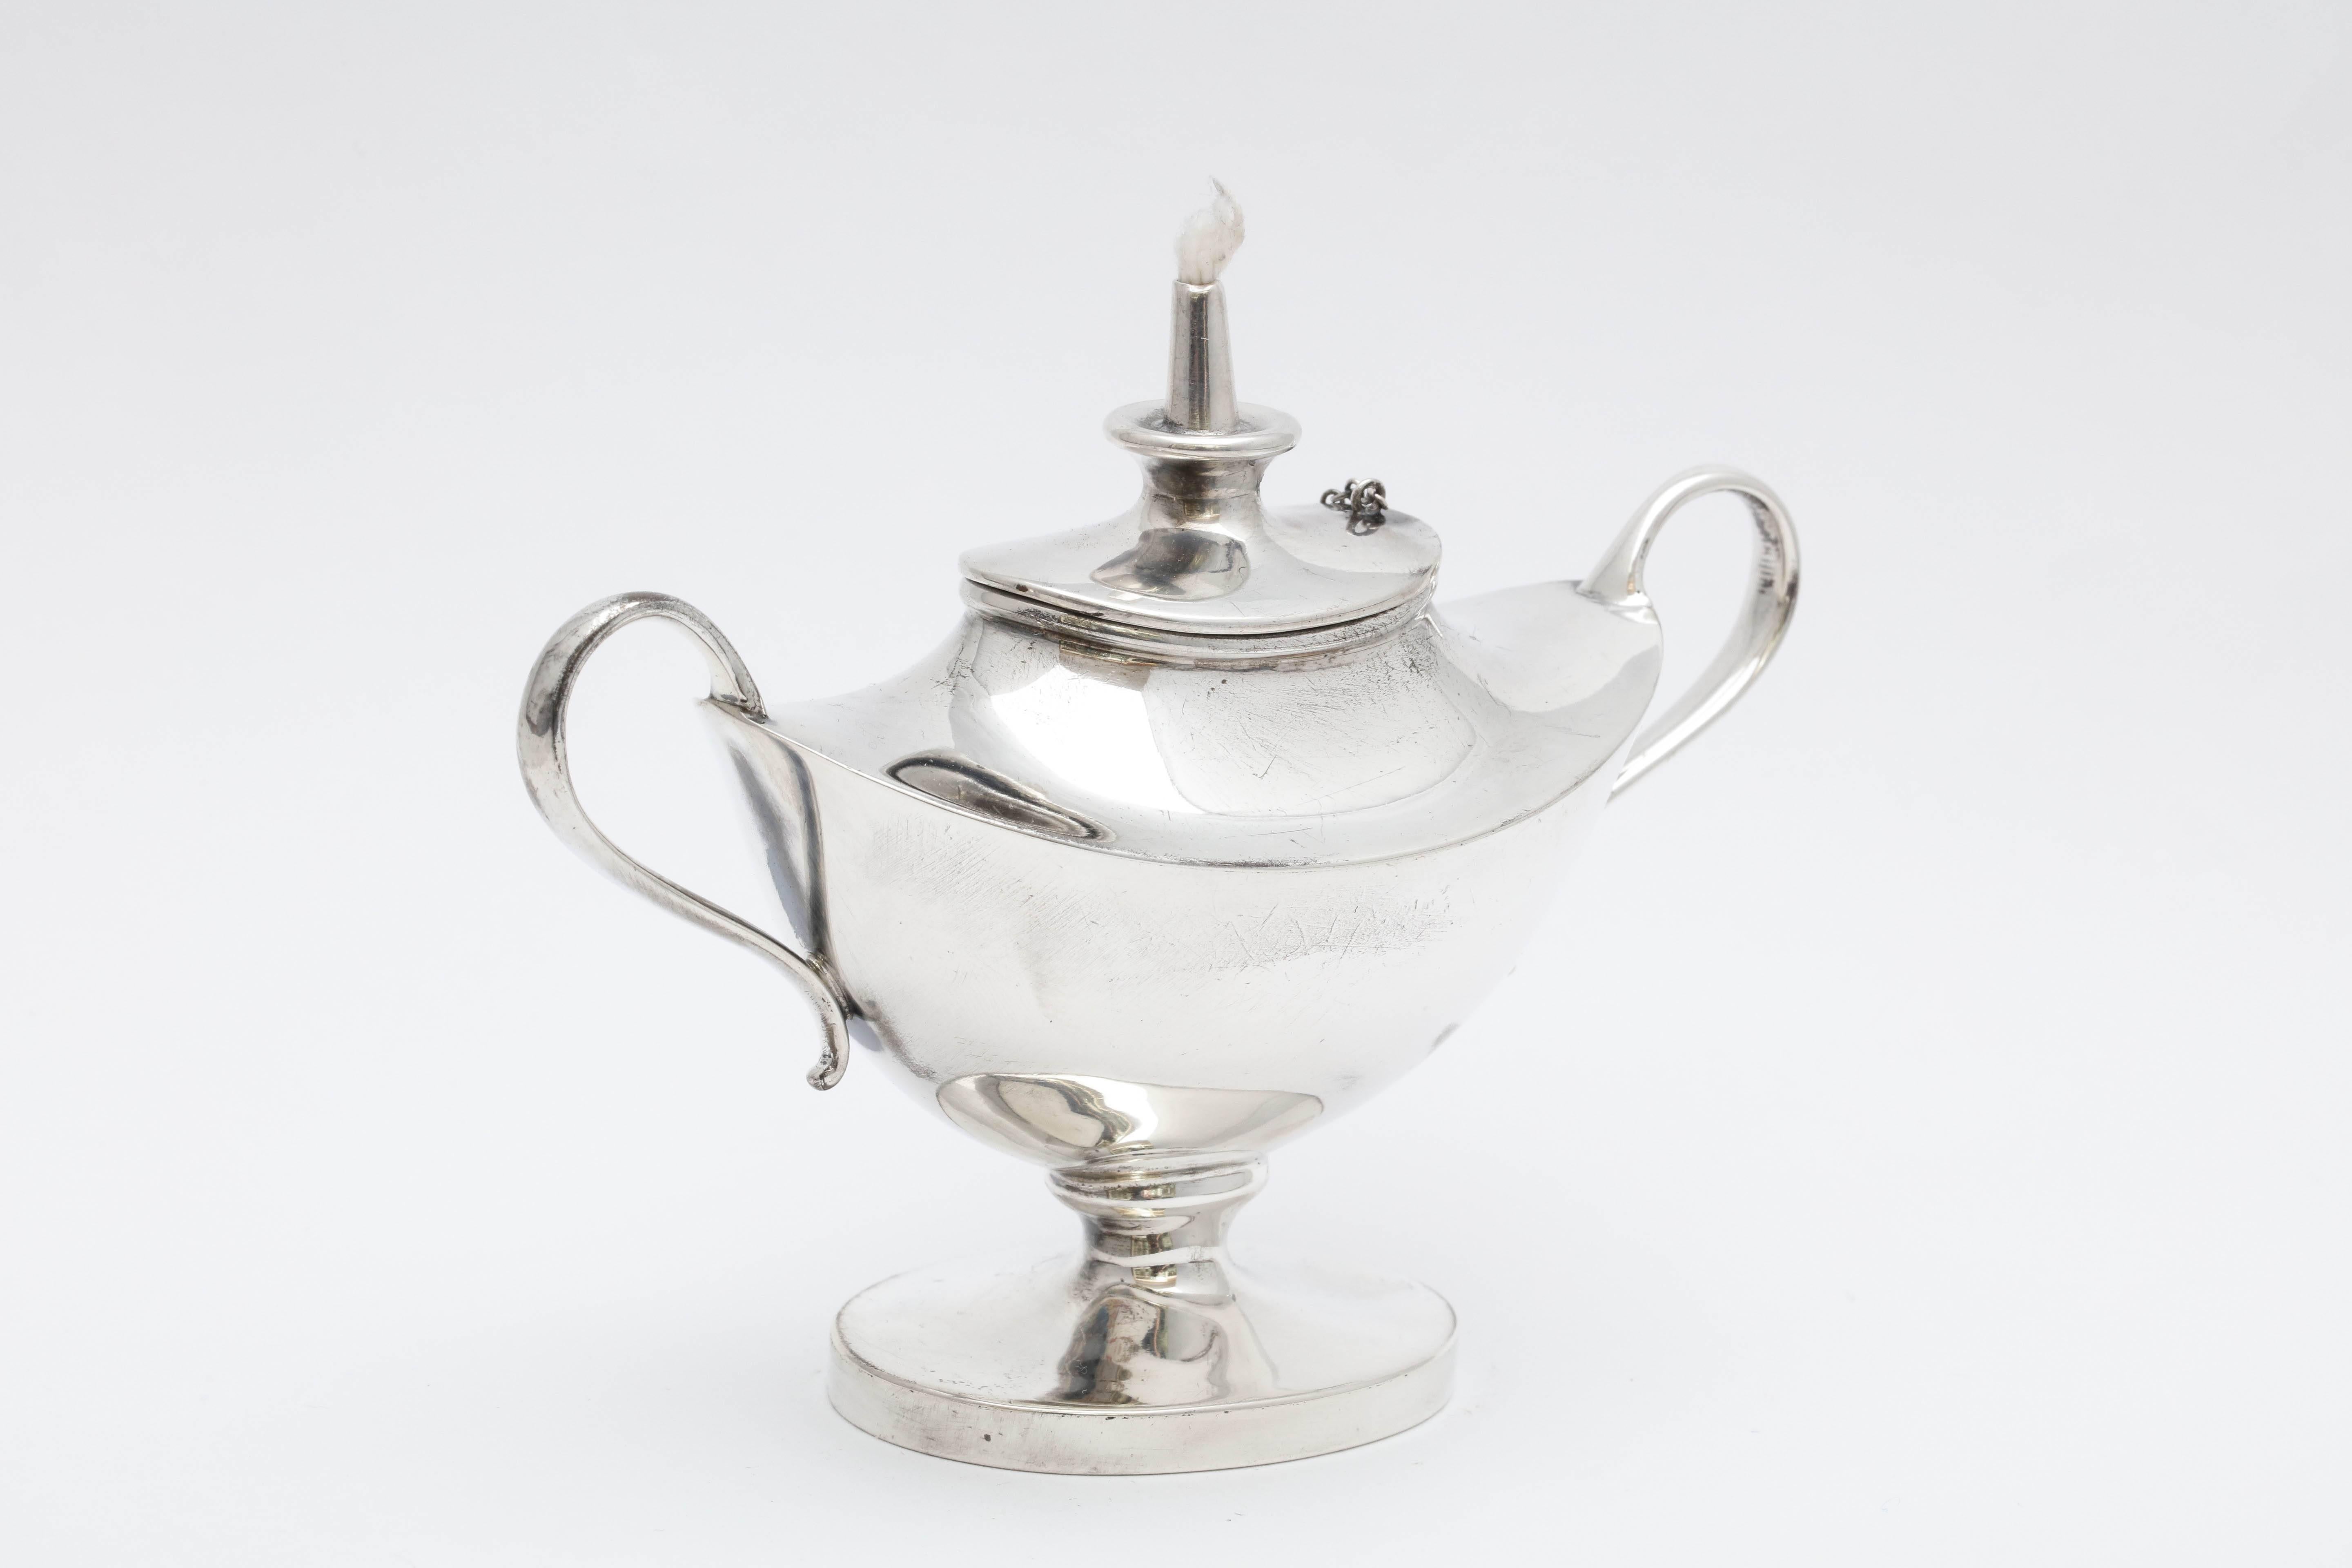 Early 20th Century Edwardian Sterling Silver Aladdin's Lamp-Style Table Oil Lamp or Lighter